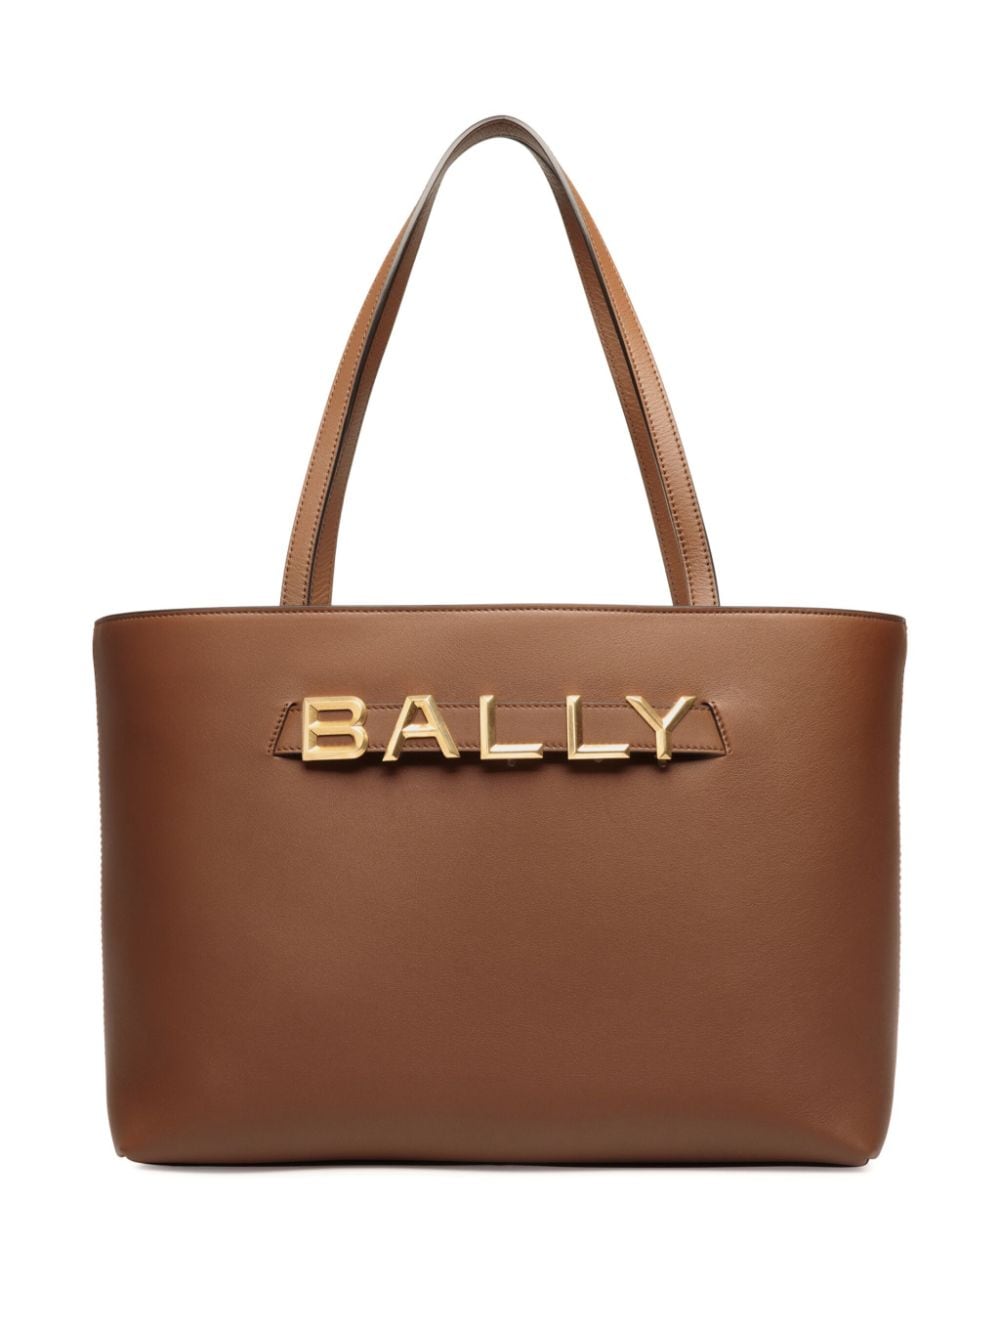 Bally Spell leather tote bag - Brown von Bally